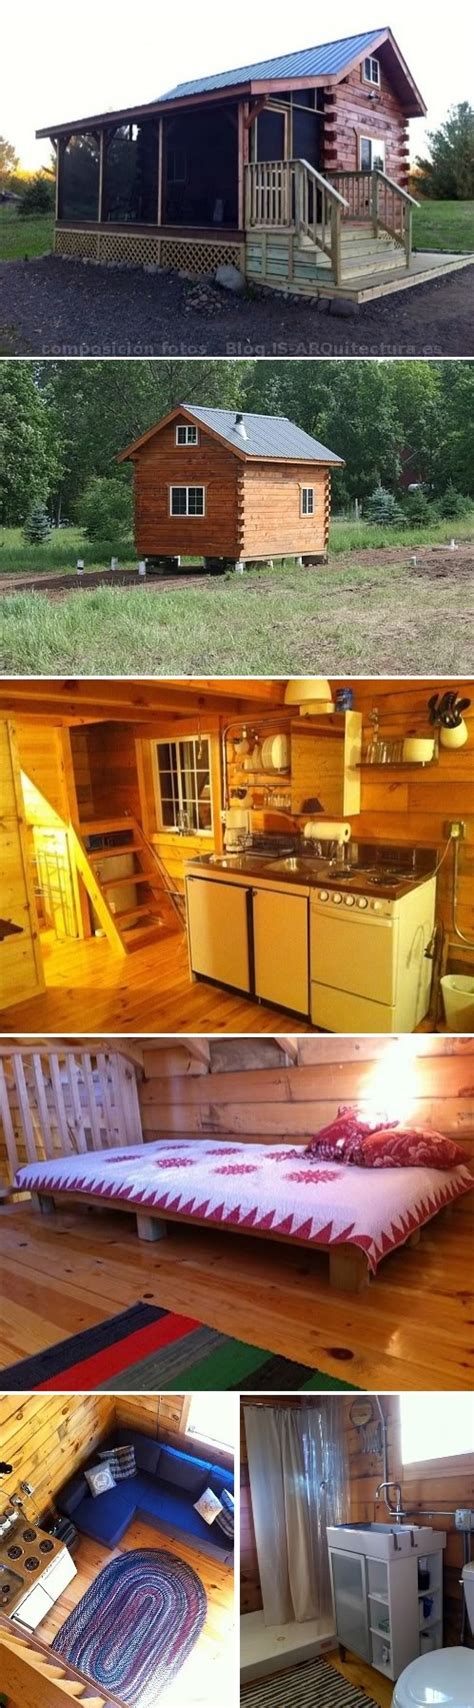 Tiny Log Cabin With Screened In Porch On A Budget Tiny House Pins